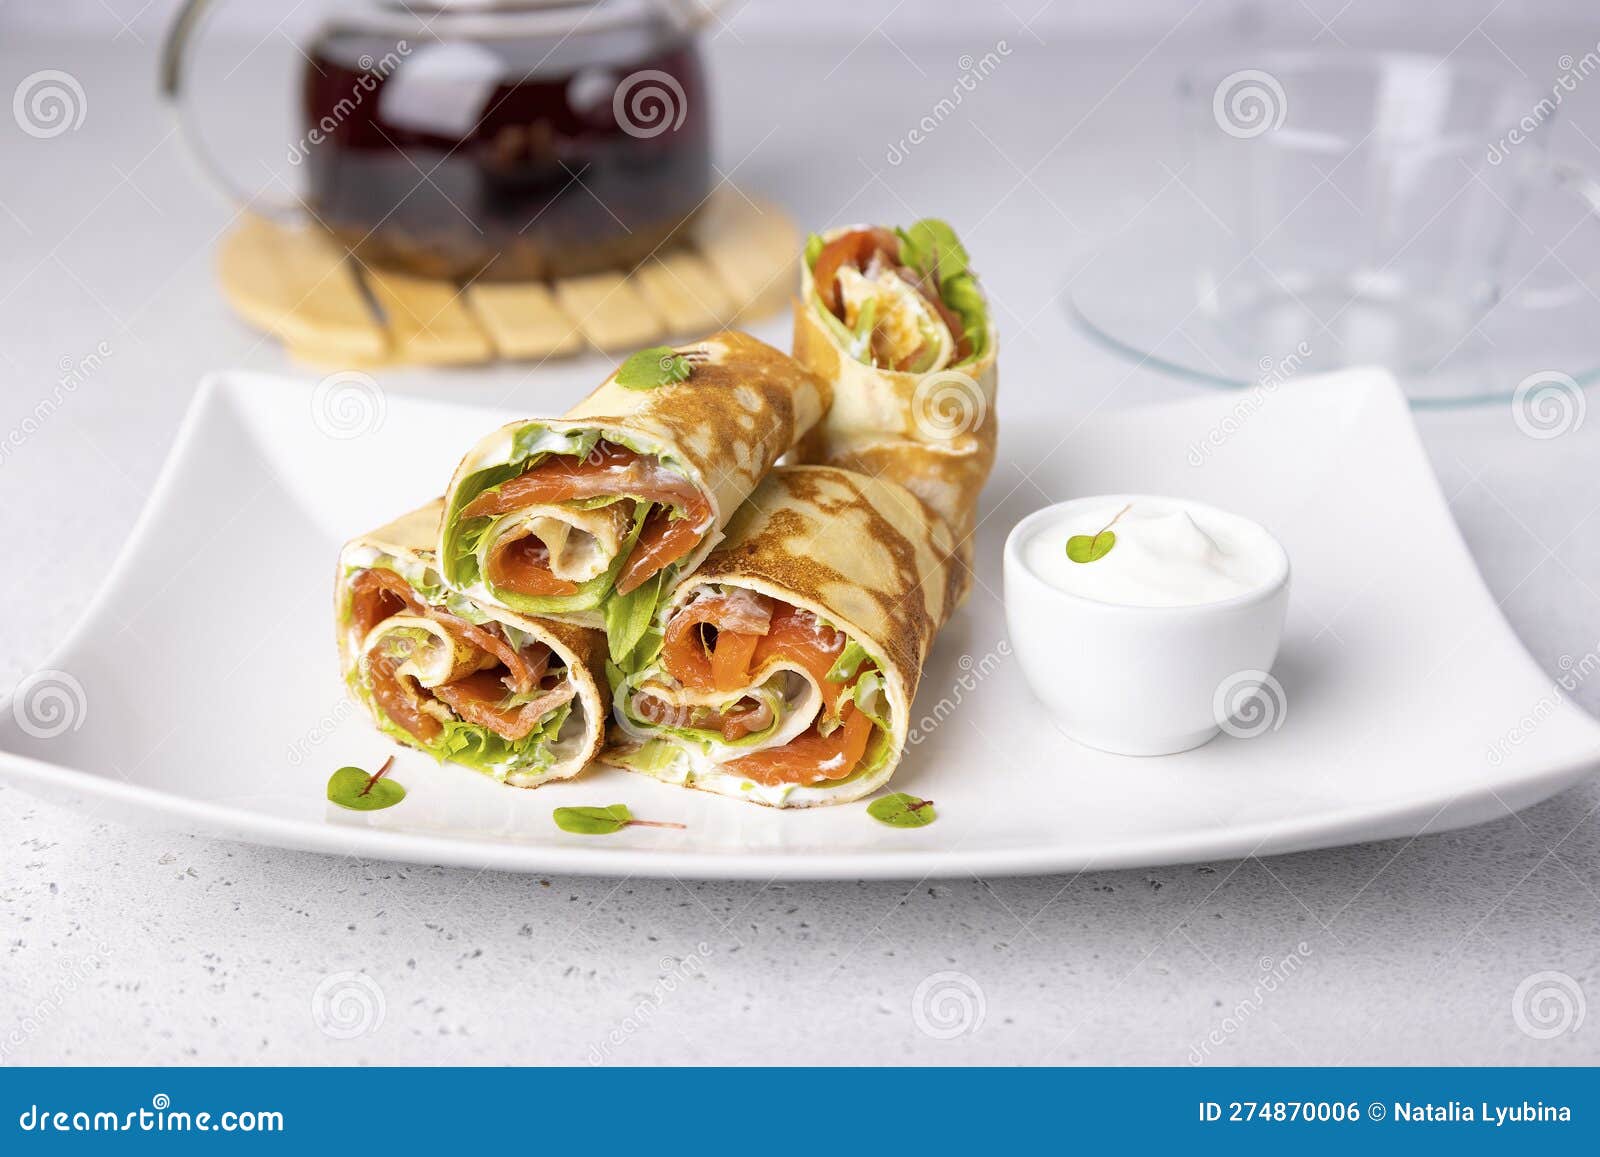 pancakes with salmon (trout), sour cream, greenstuff and tea. thin, not sweet blinchiki stuffed with red fish.